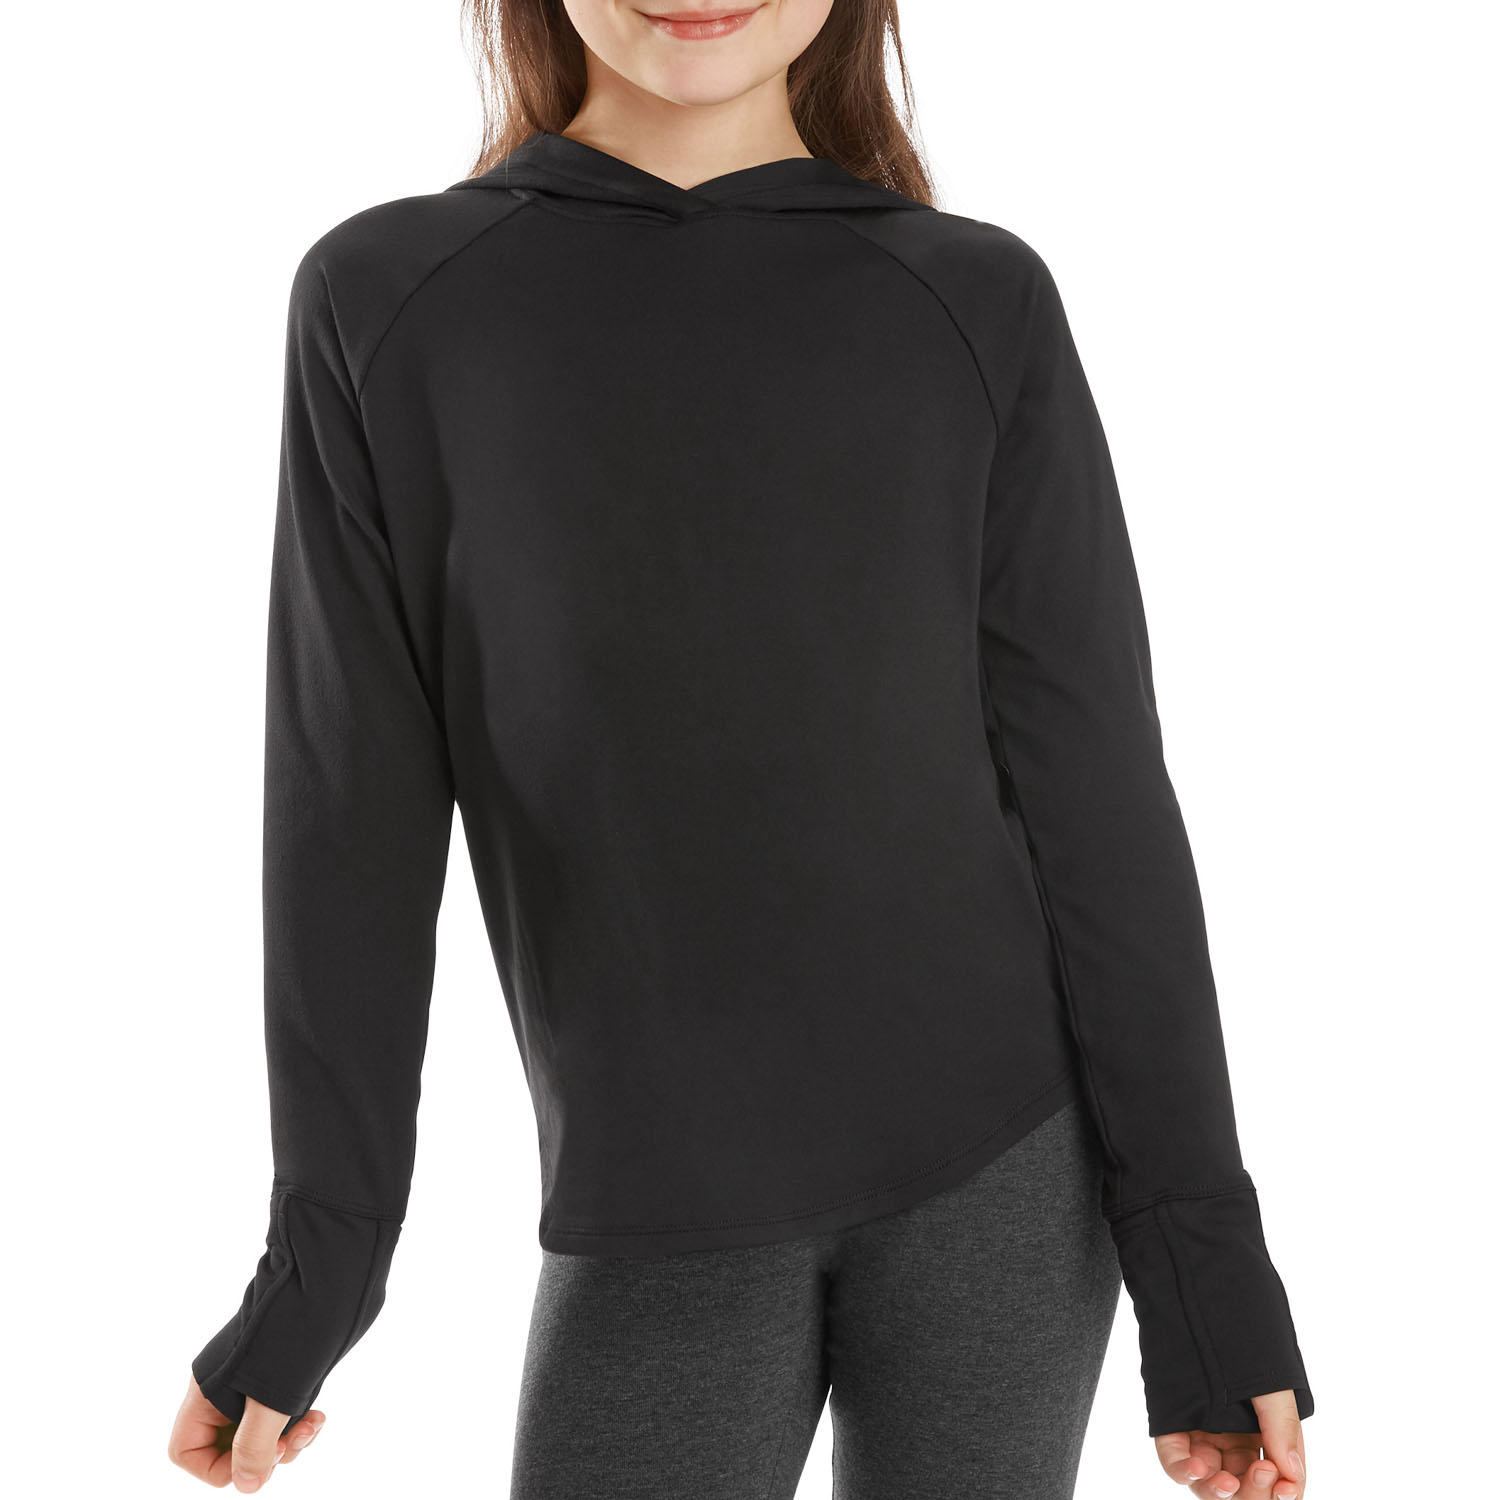 Sam's Club: Member's Mark Girls' Movement Long Sleeve Hooded Top (Black, Size 7/8) $4.80 + F/S for Plus Members